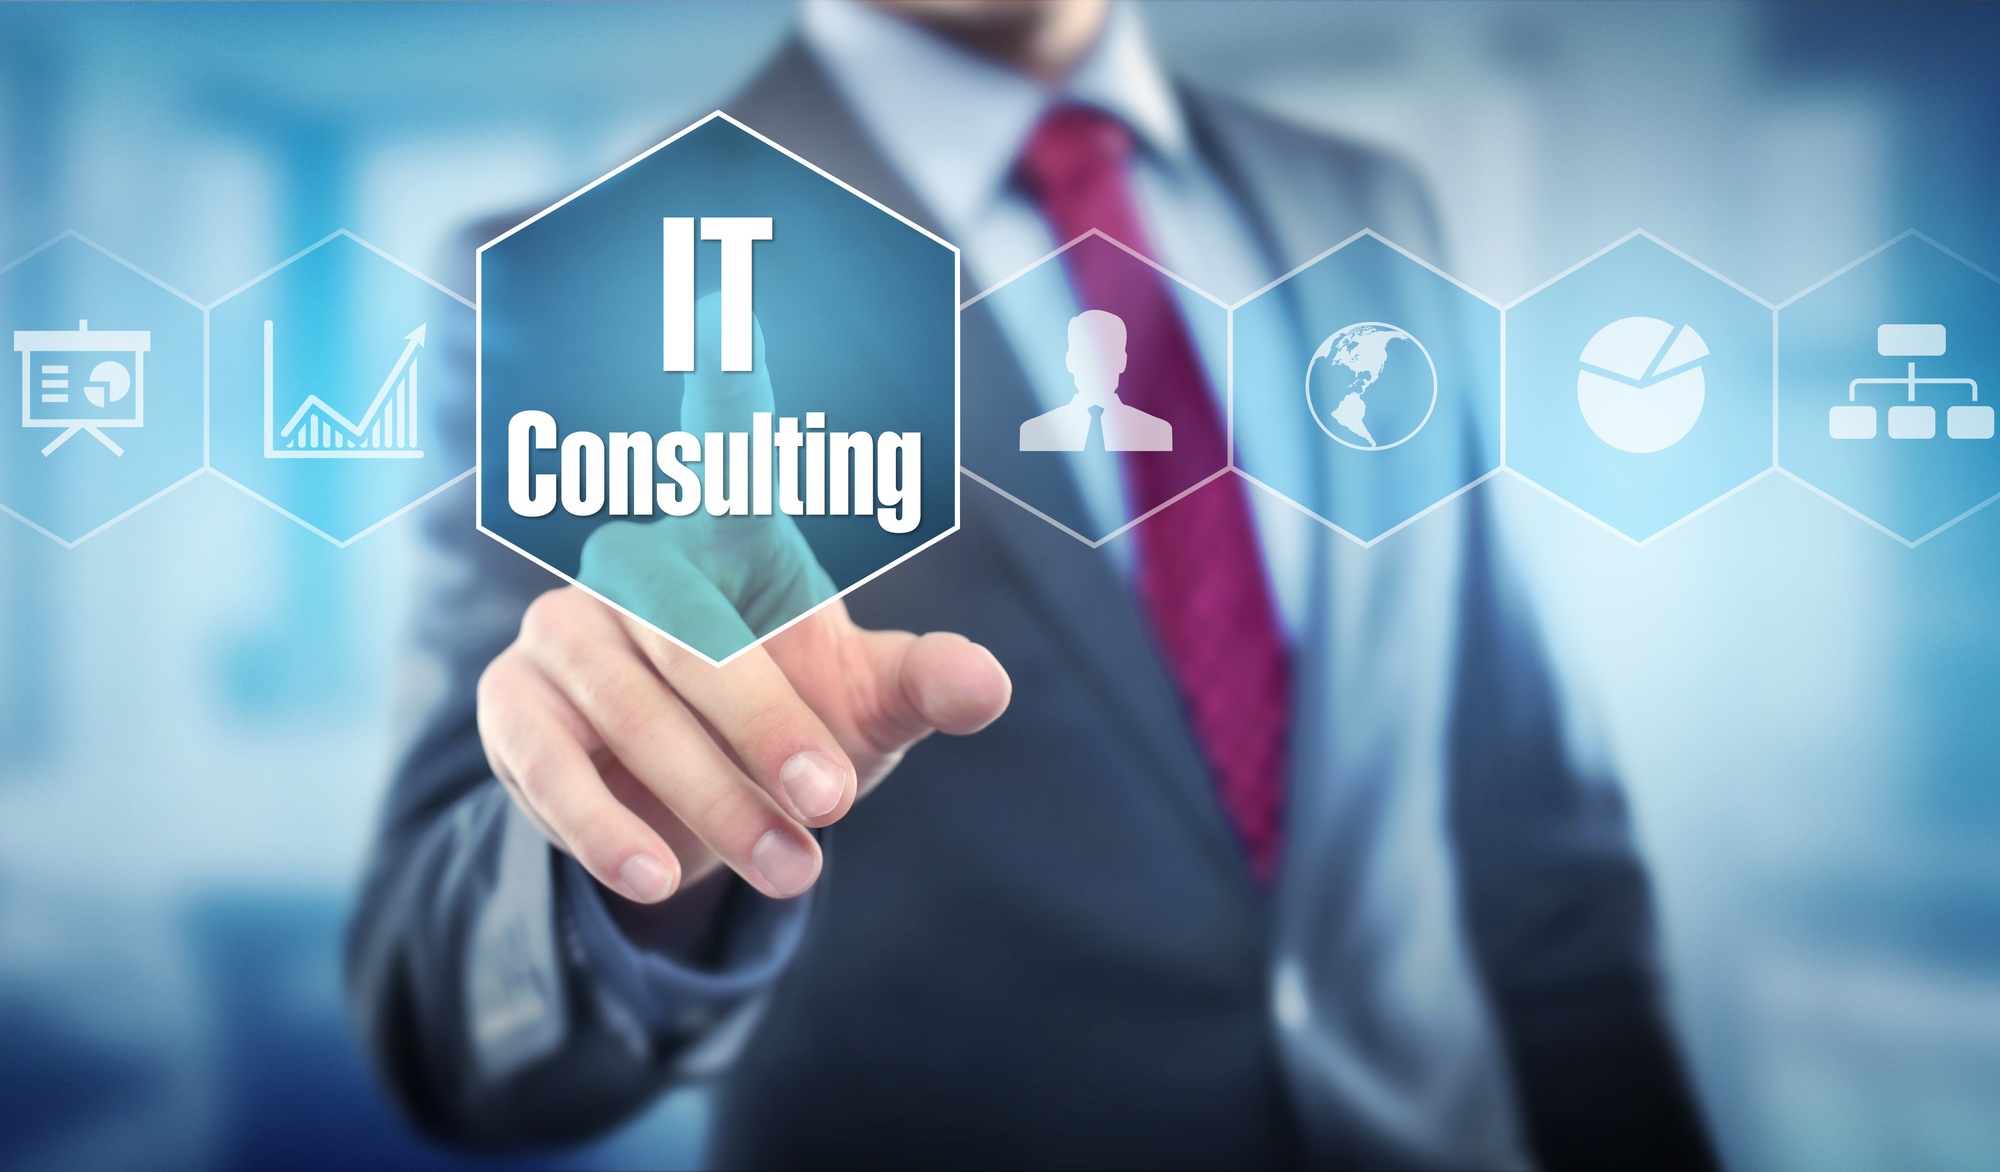 4 Tips For Getting The Most Out Of IT Consulting Services